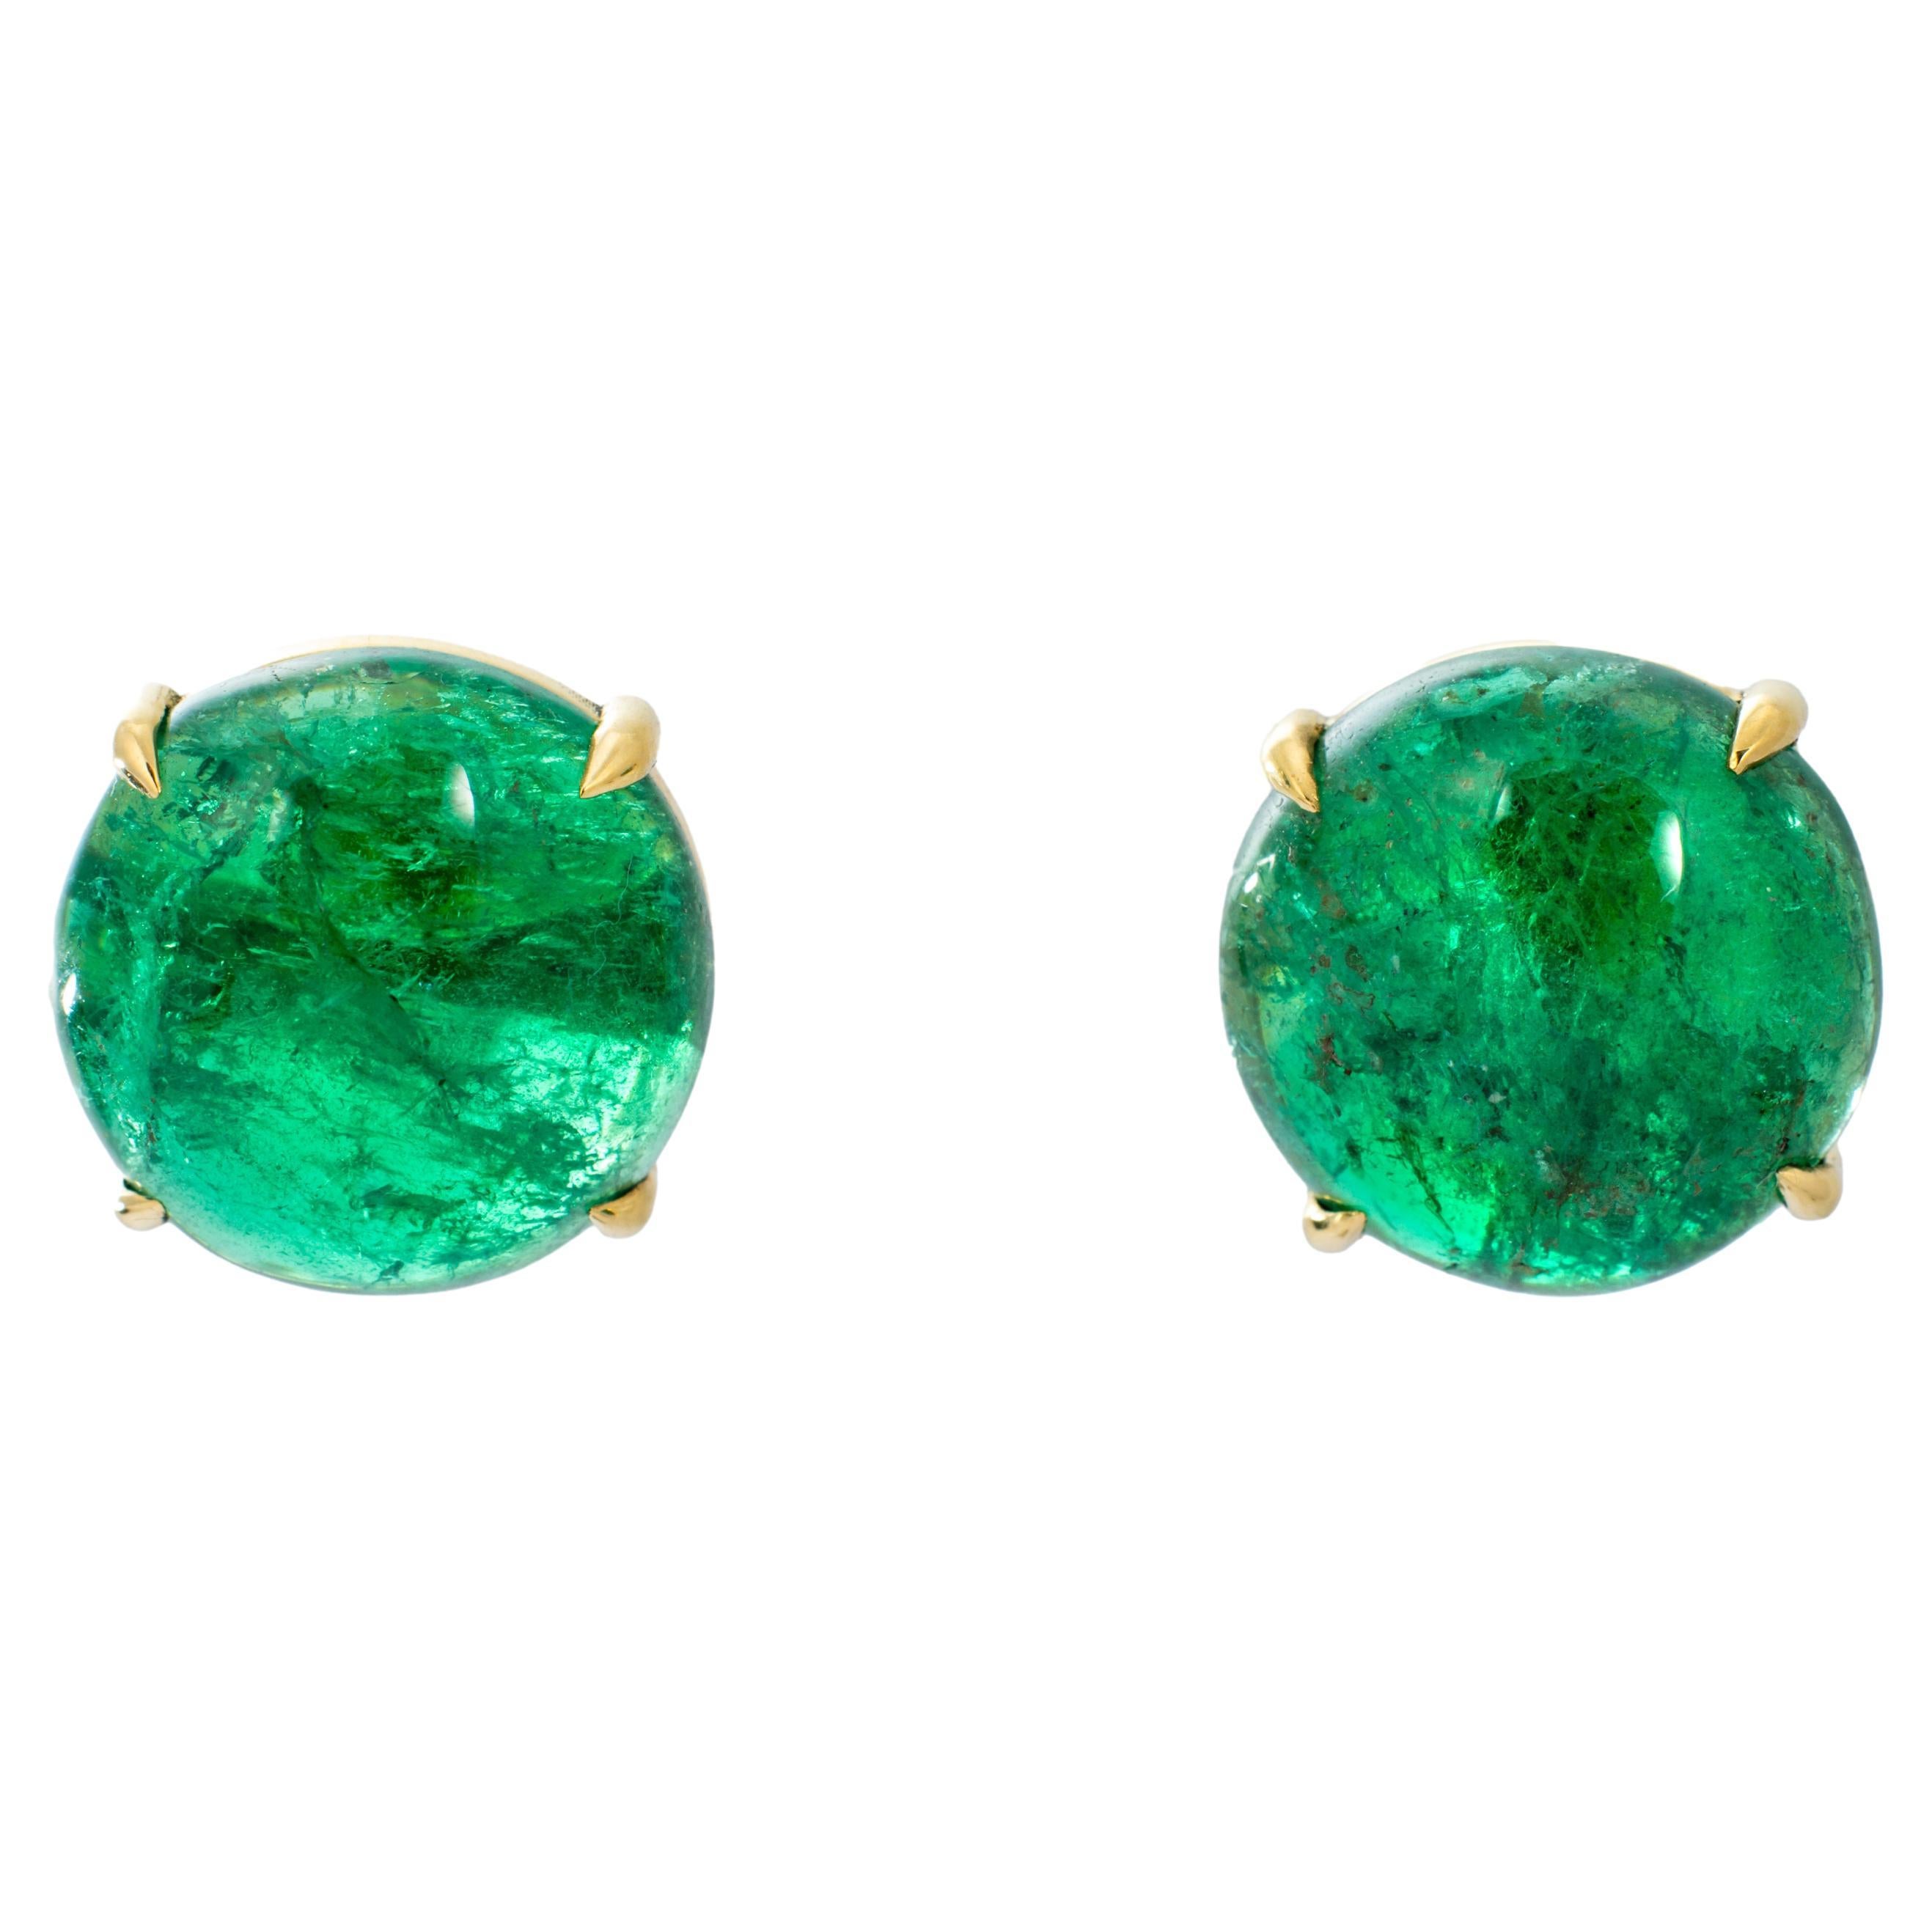 "Costis" Stud Earrings, with 15.83 carats round-cut Zambian Emeralds For Sale